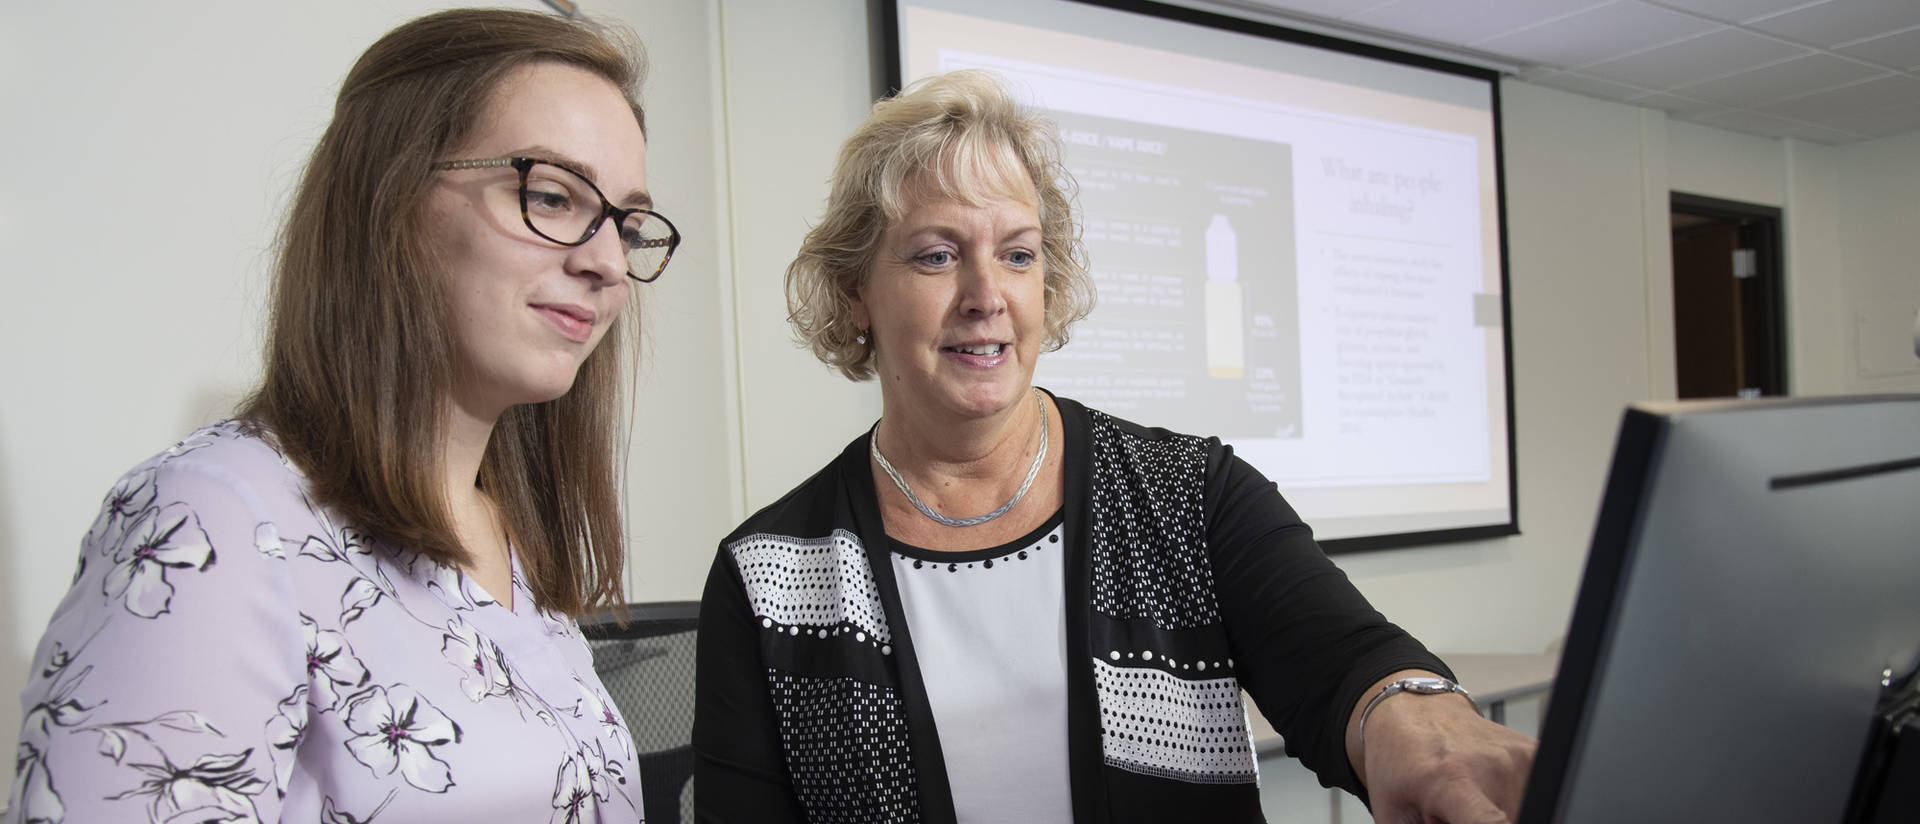 Nursing student Heidi Pardon (left) and her faculty mentor, Dr. Diane Marcyjanik, have created a presentation they plan to share with teens about the dangers of vaping.